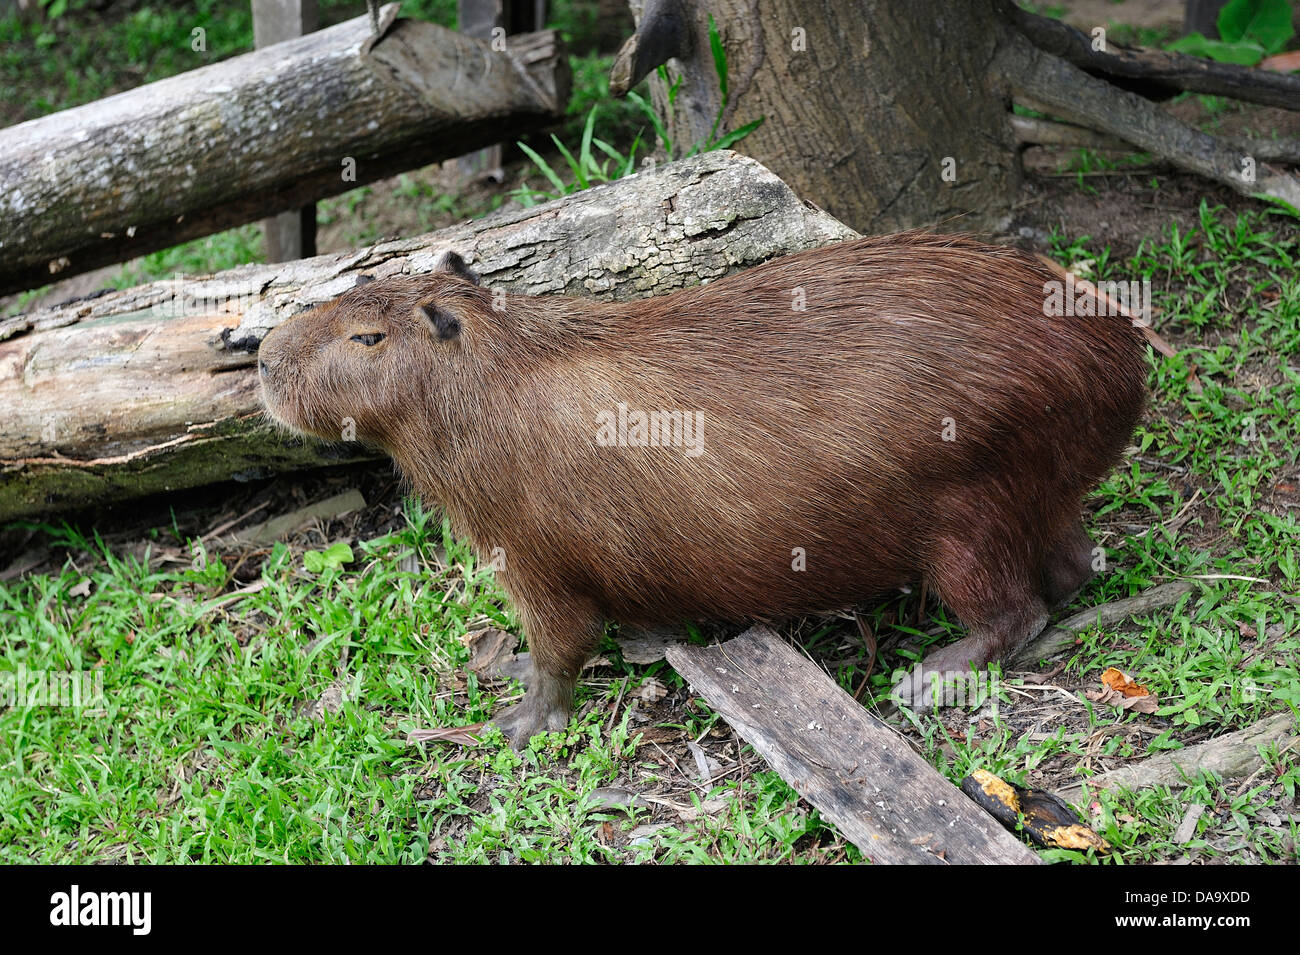 South America, Peru, Indigenous, Indian tribe, Indian Village, Ticuna Indians, Amazon, River, nutria, animal, wildlife, Stock Photo